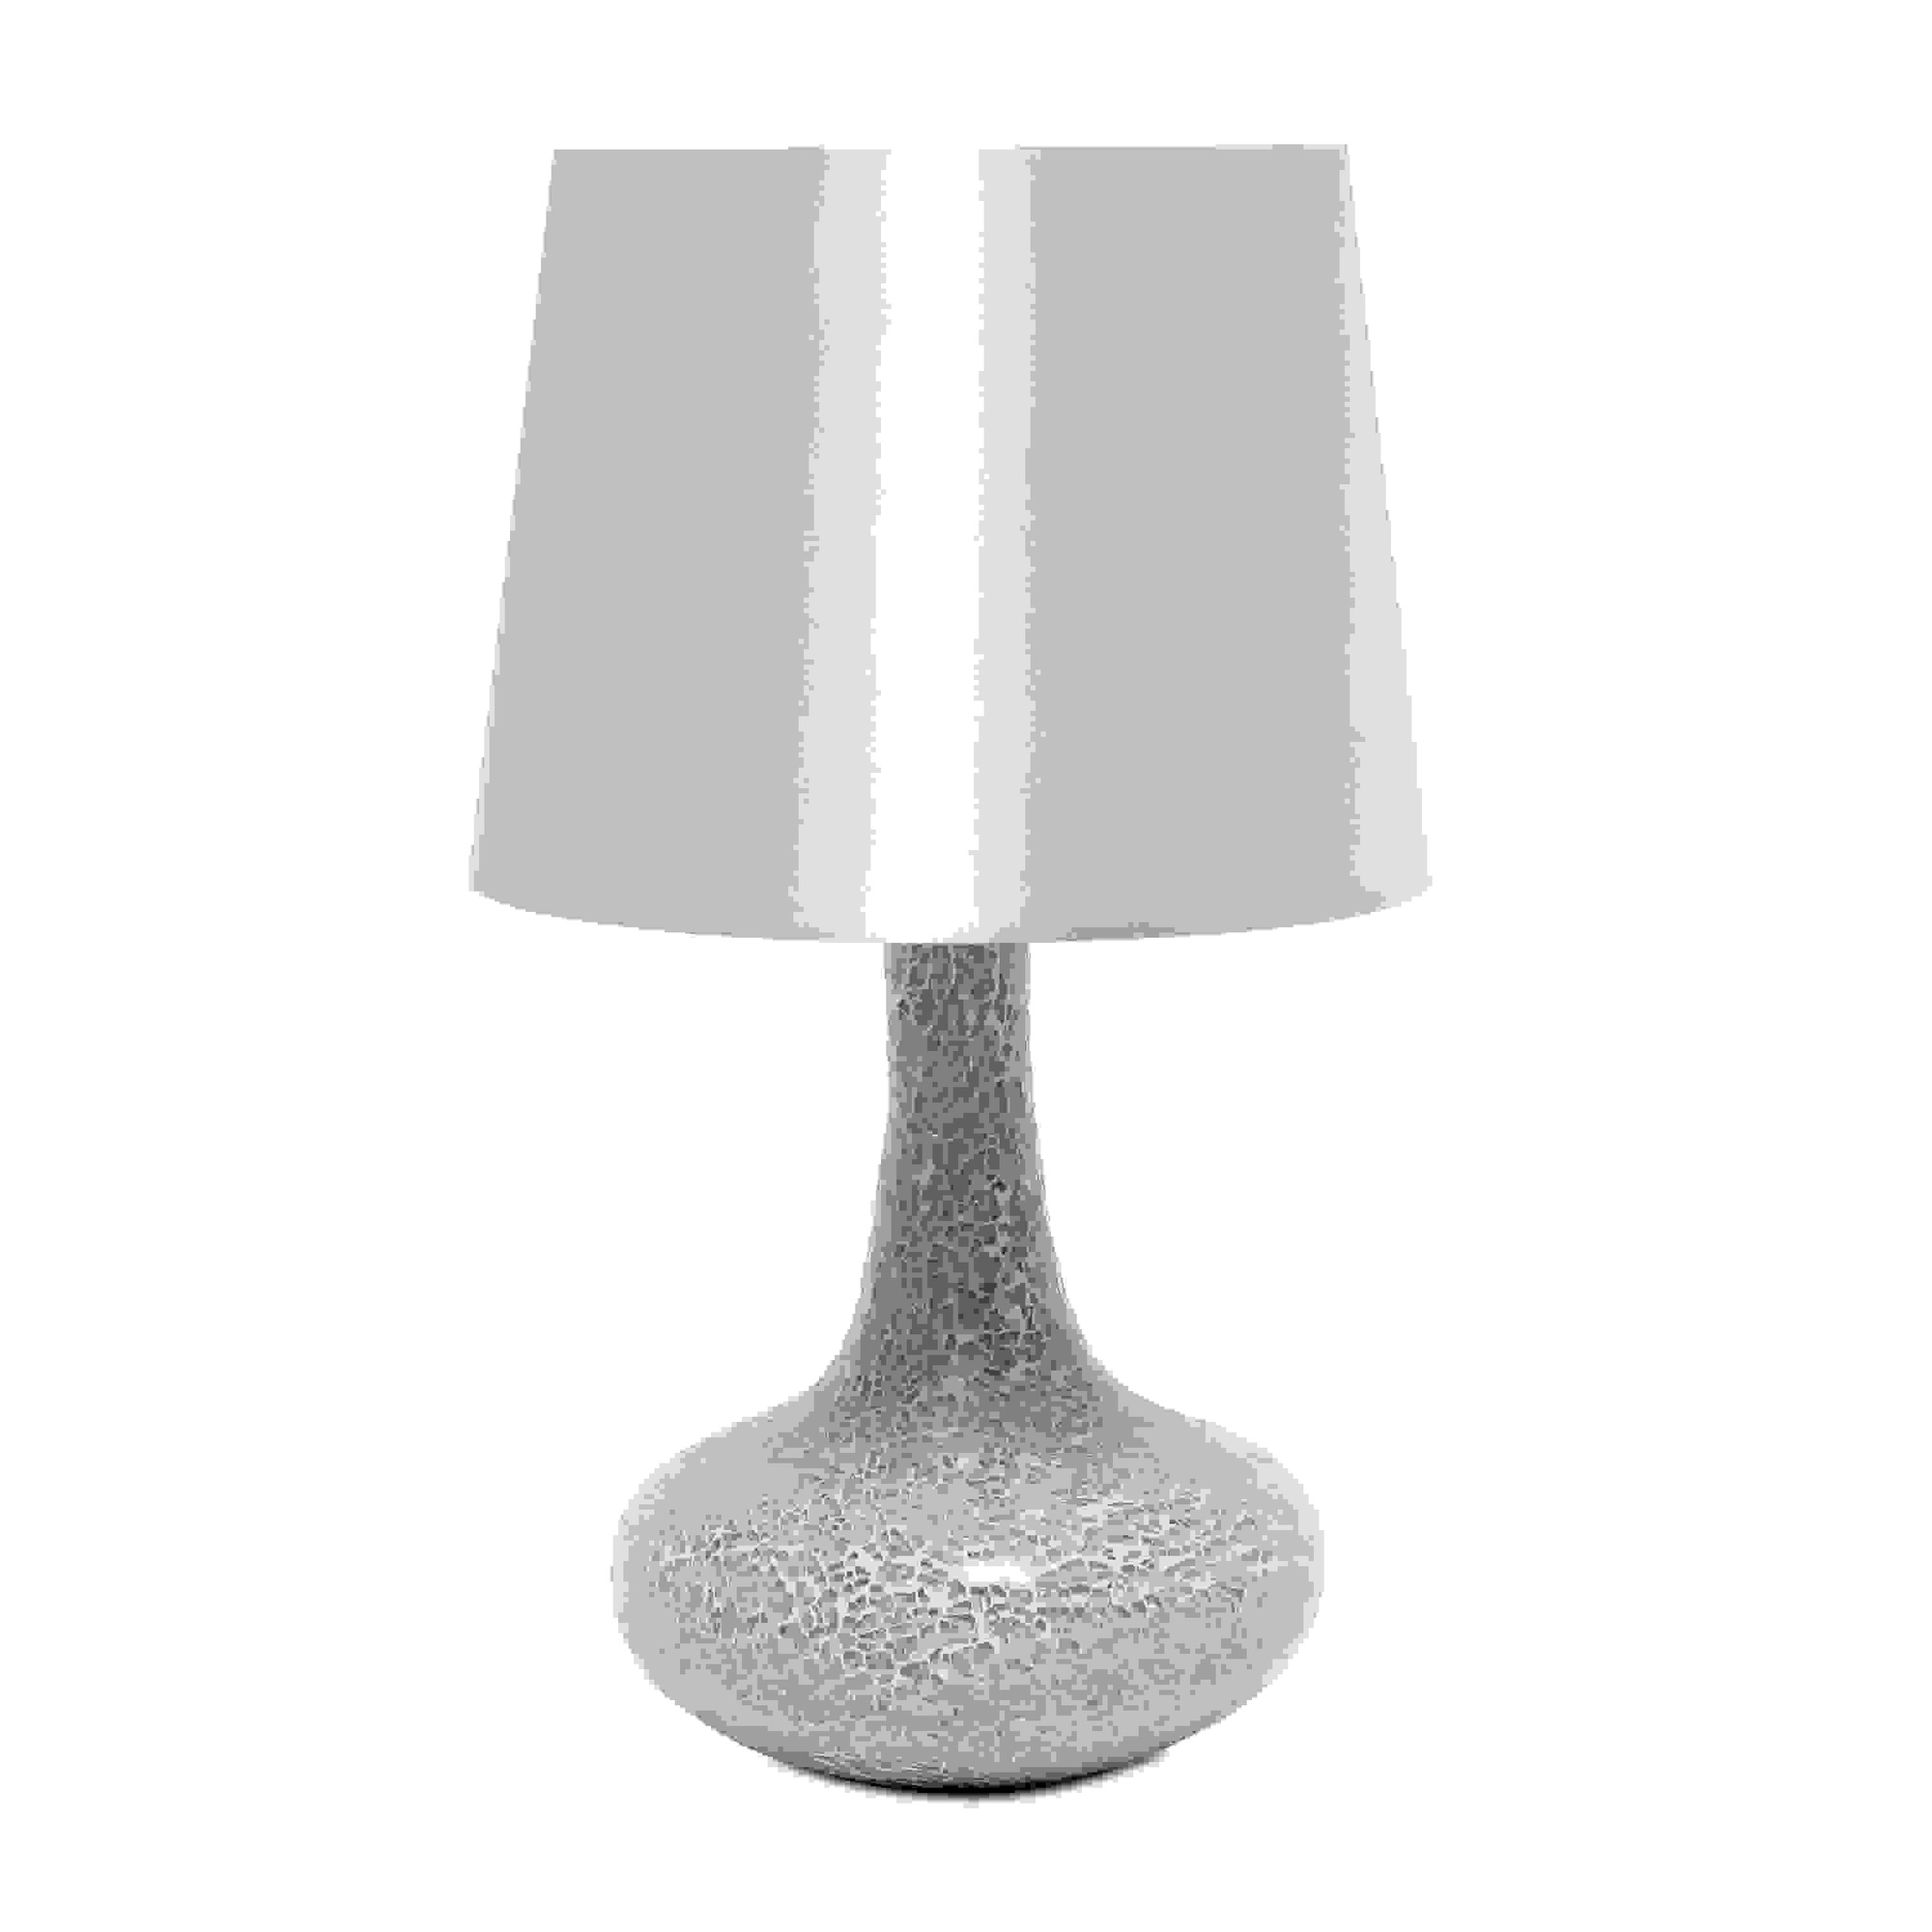 Simple Designs Mosaic Tiled Glass Genie Table Lamp with Fabric Shade